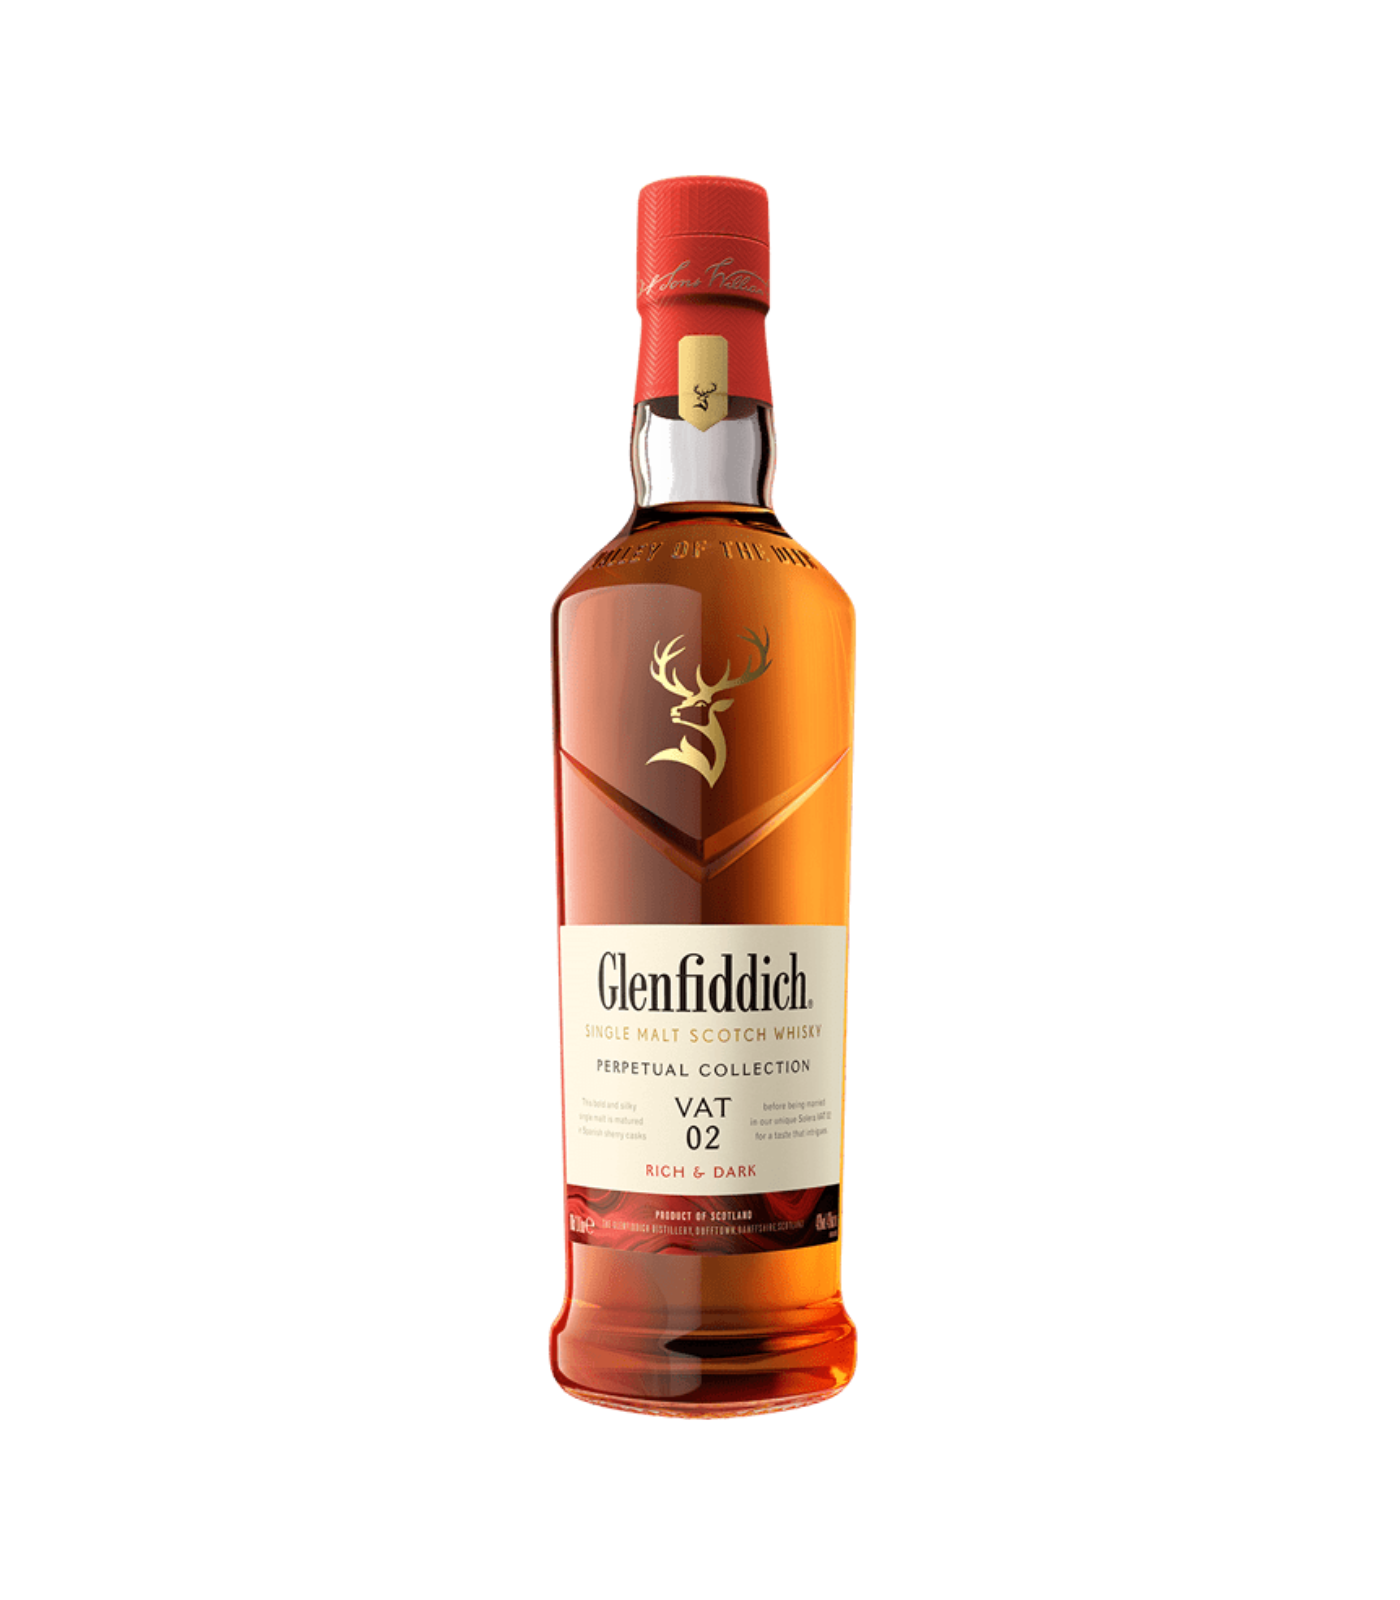 Glenfiddich Perpetual Collection - Vat 02 Rich & Dark Whisky (100cl, 43%)